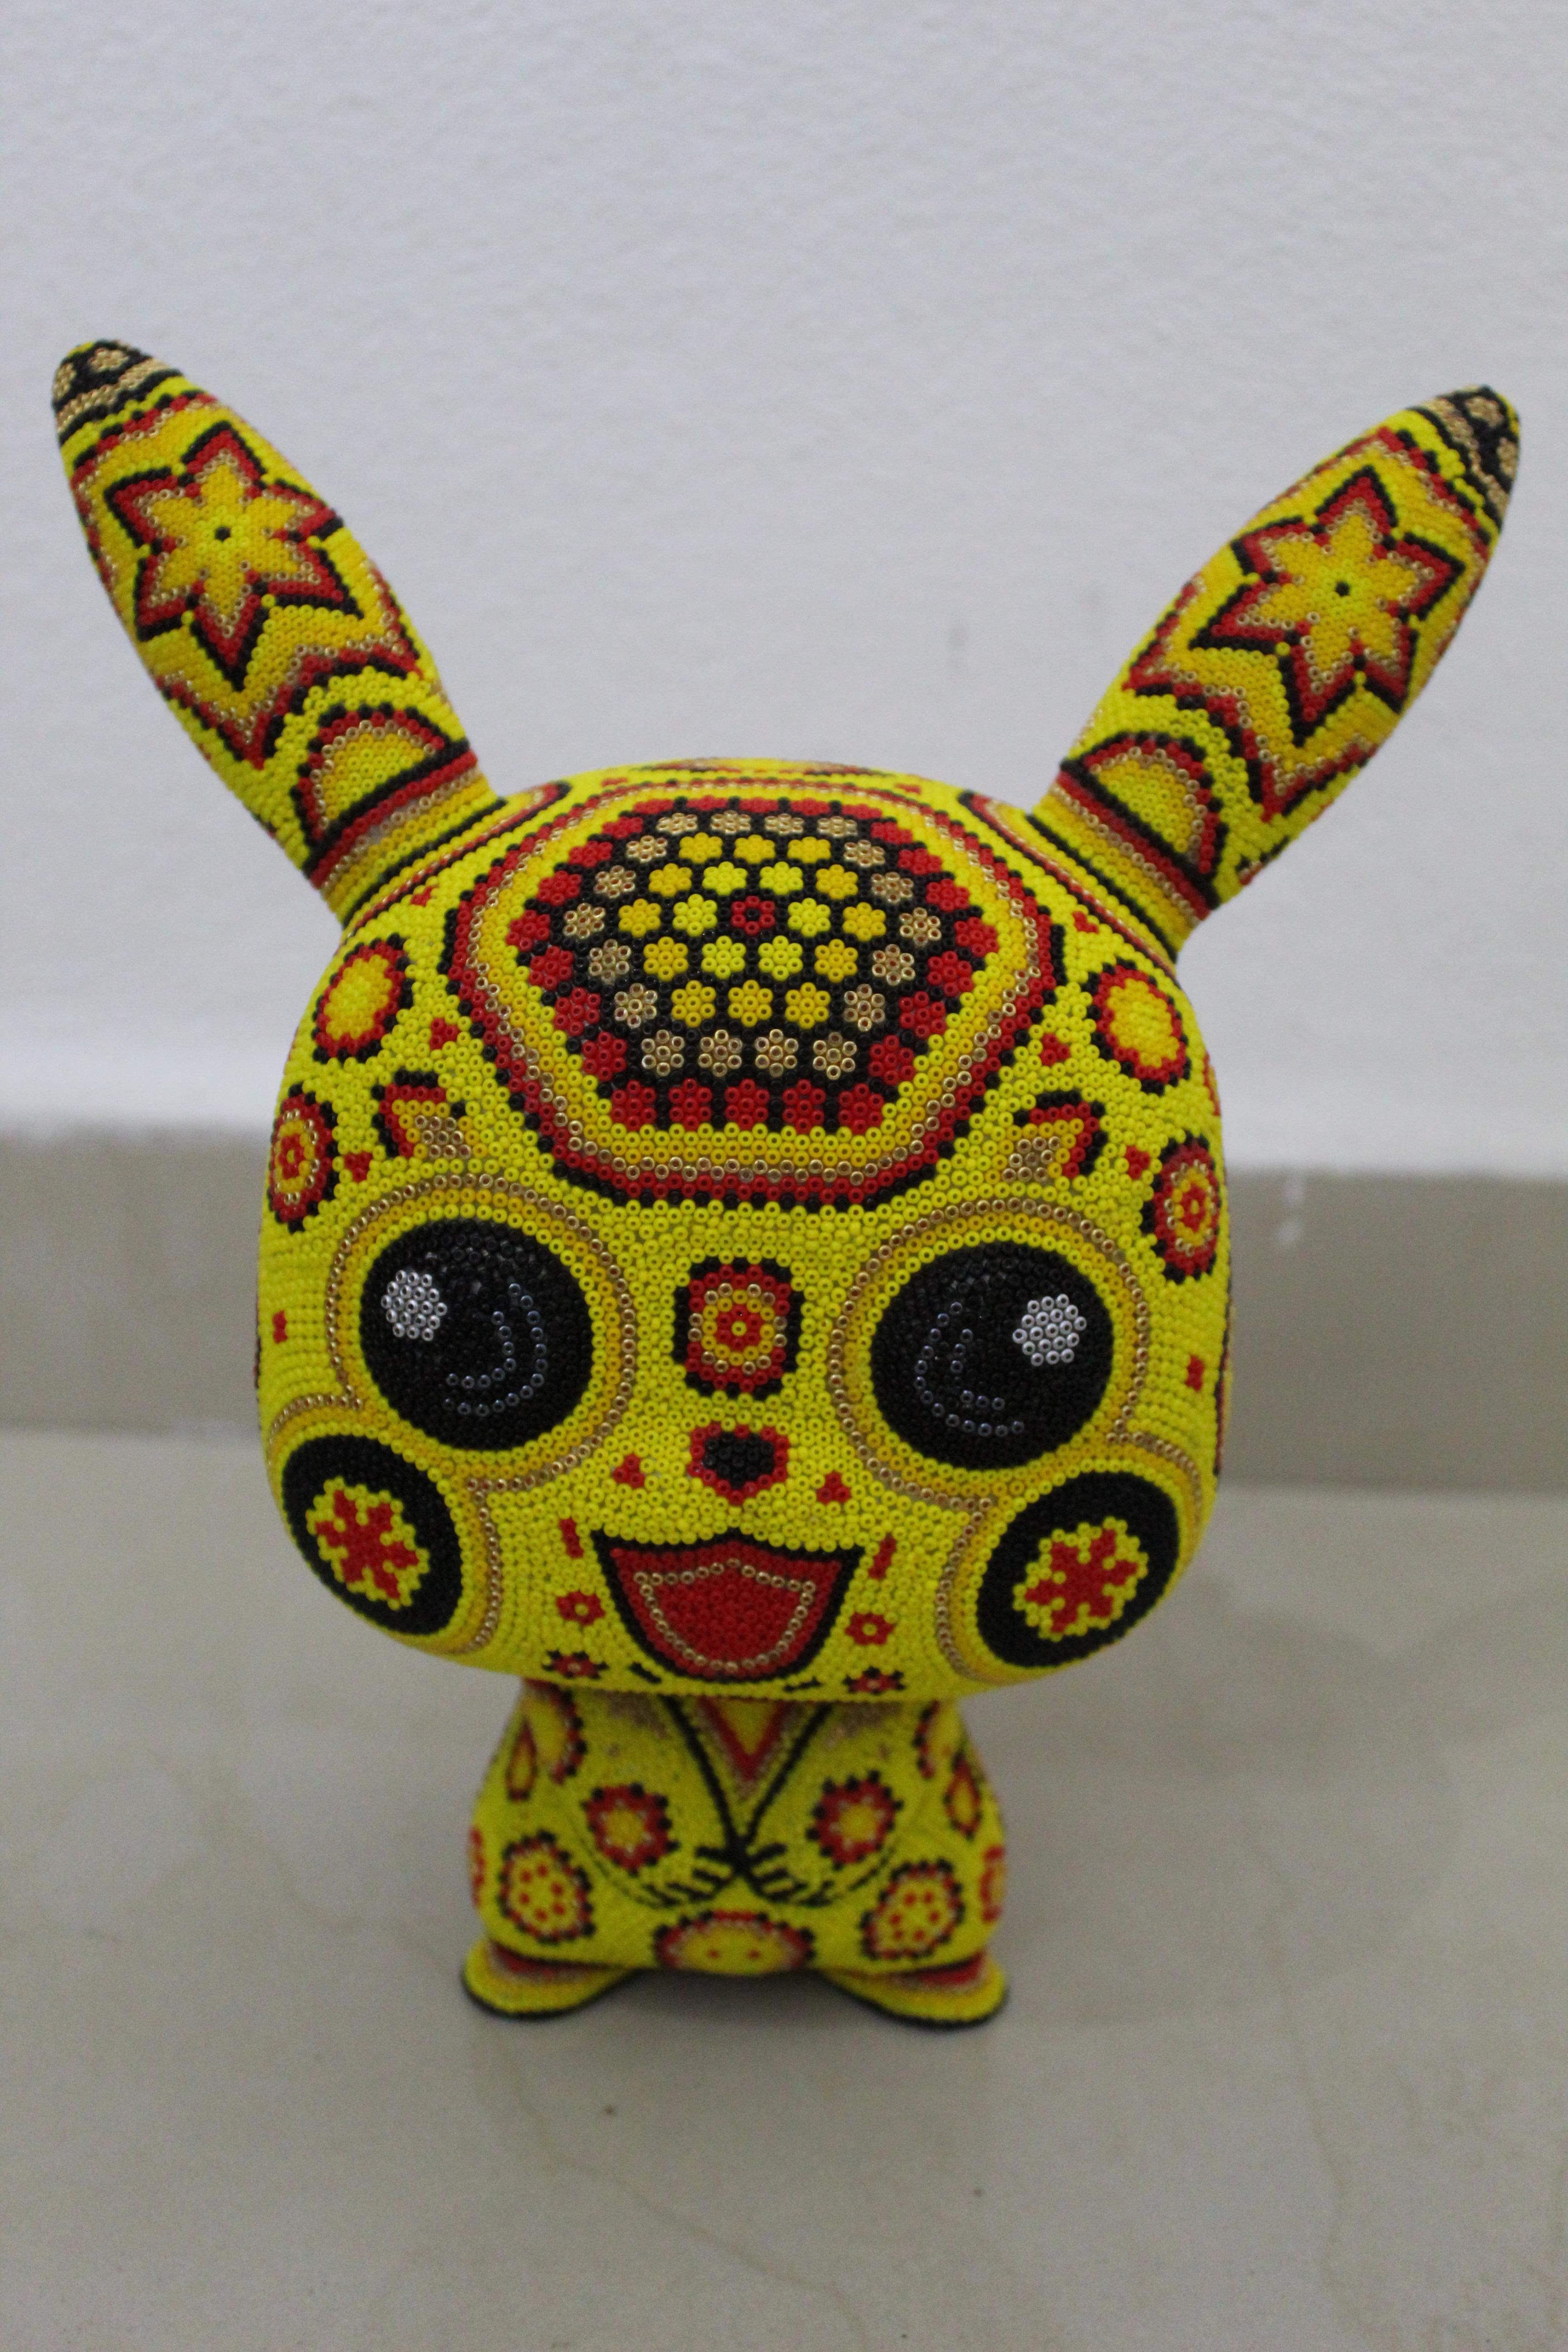 CHROMA aka Rick Wolfryd  Abstract Sculpture - "I'm All Ears" from Huichol ALTERATIONS Series .0005